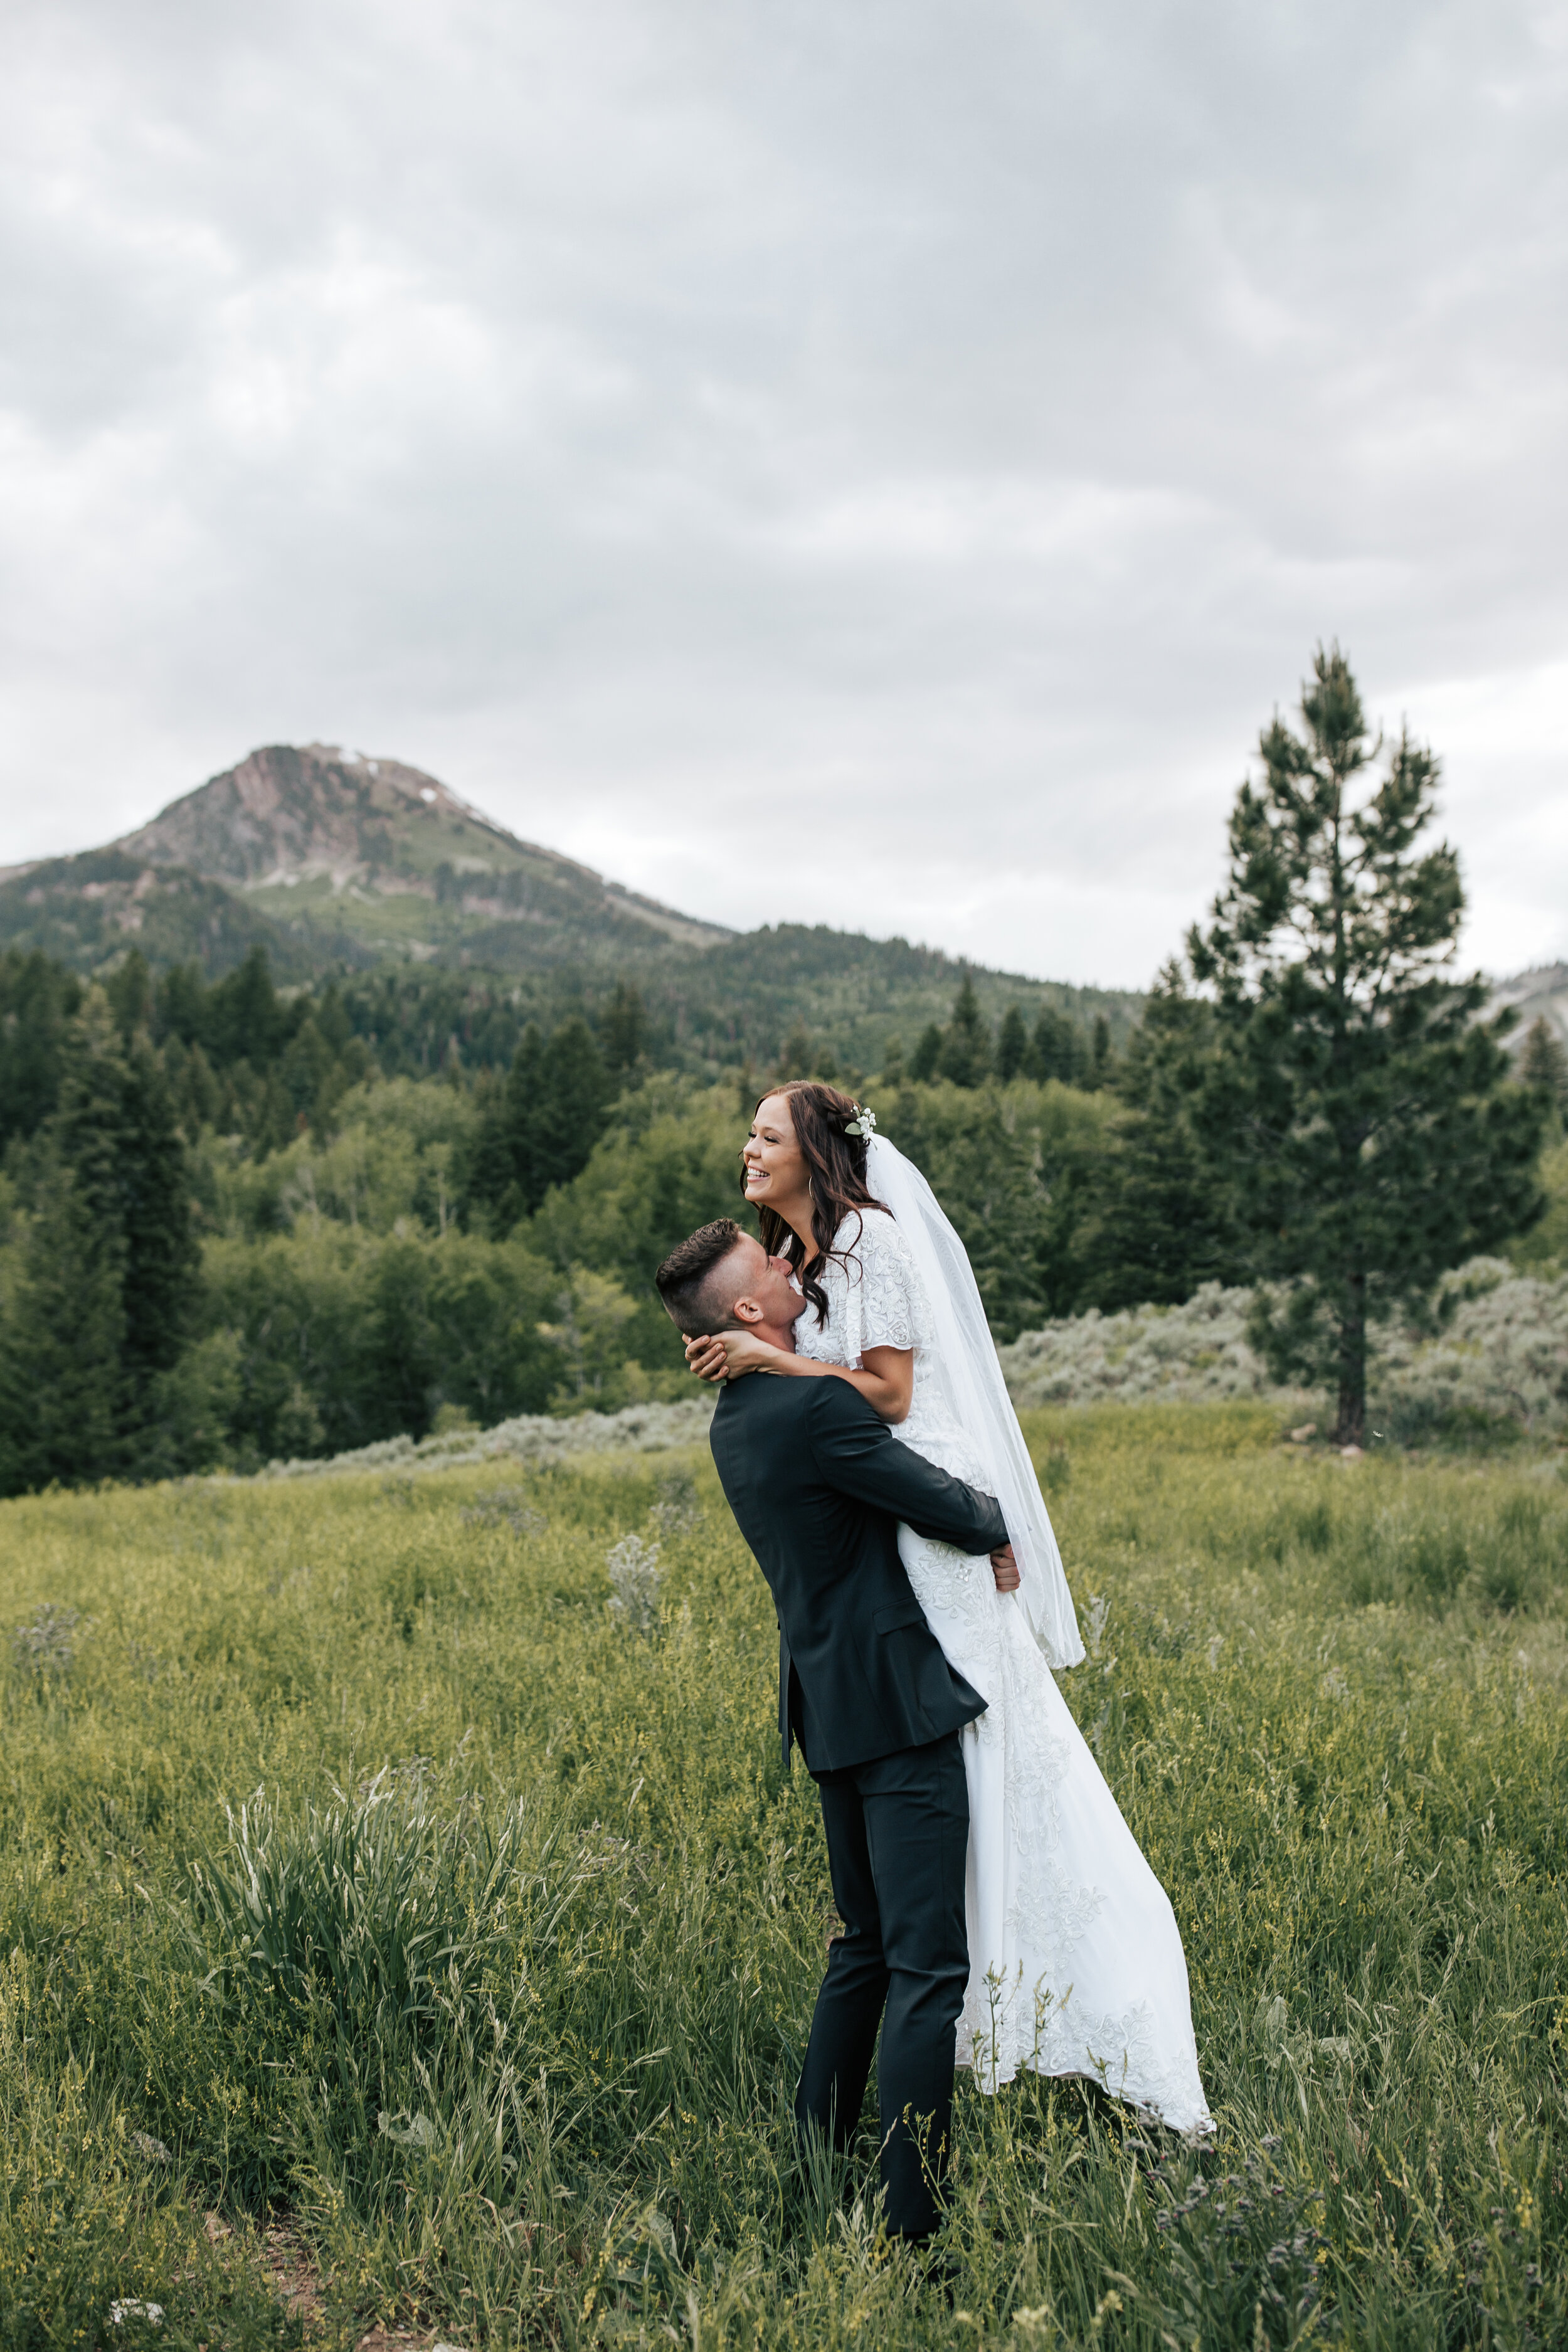  A groom holds his laughing bride up in his arms in a green grass field in the summertime in the Utah Mountains by Emily Jenkins Photography. Utah mountain elopements stunning elopement photography groom holding bride #emilyjenkinsphotography #emilyj